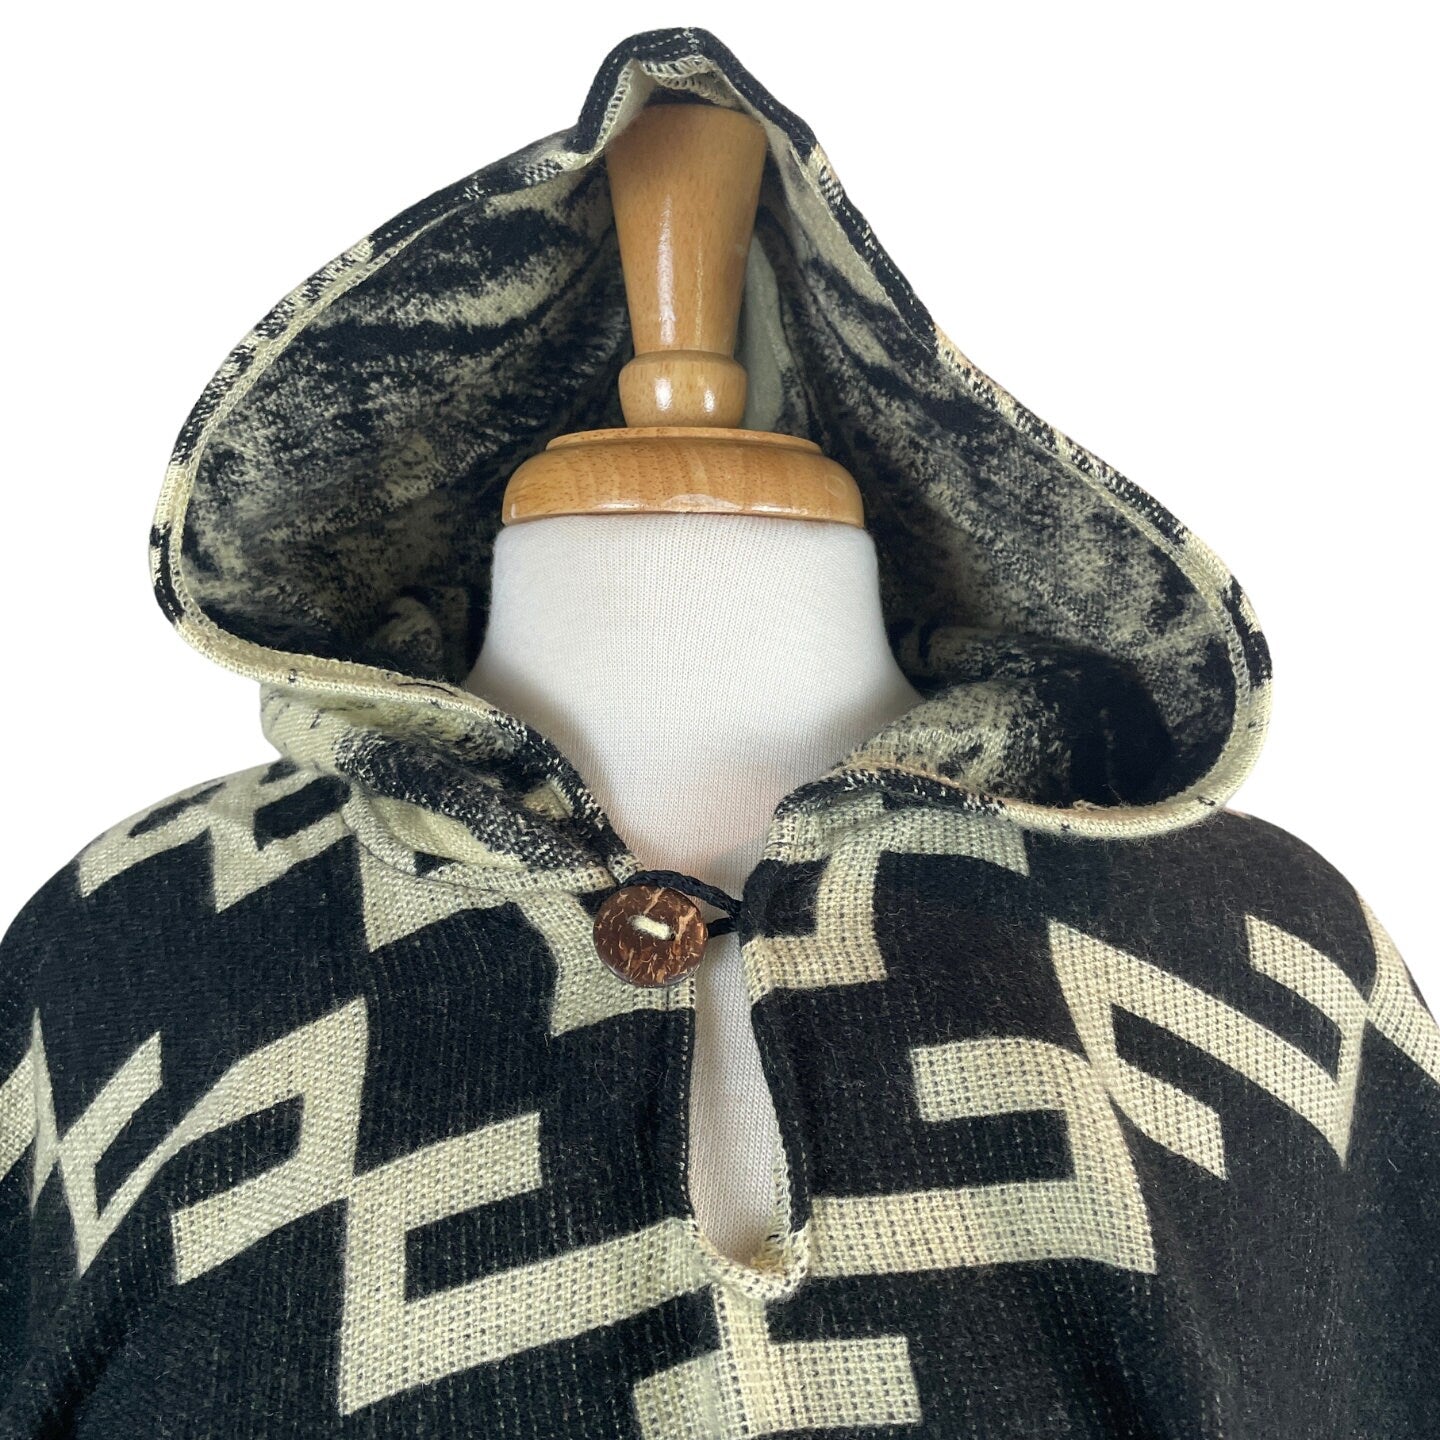 Wolf Dreamcatcher Hooded Poncho |  Black Colorful